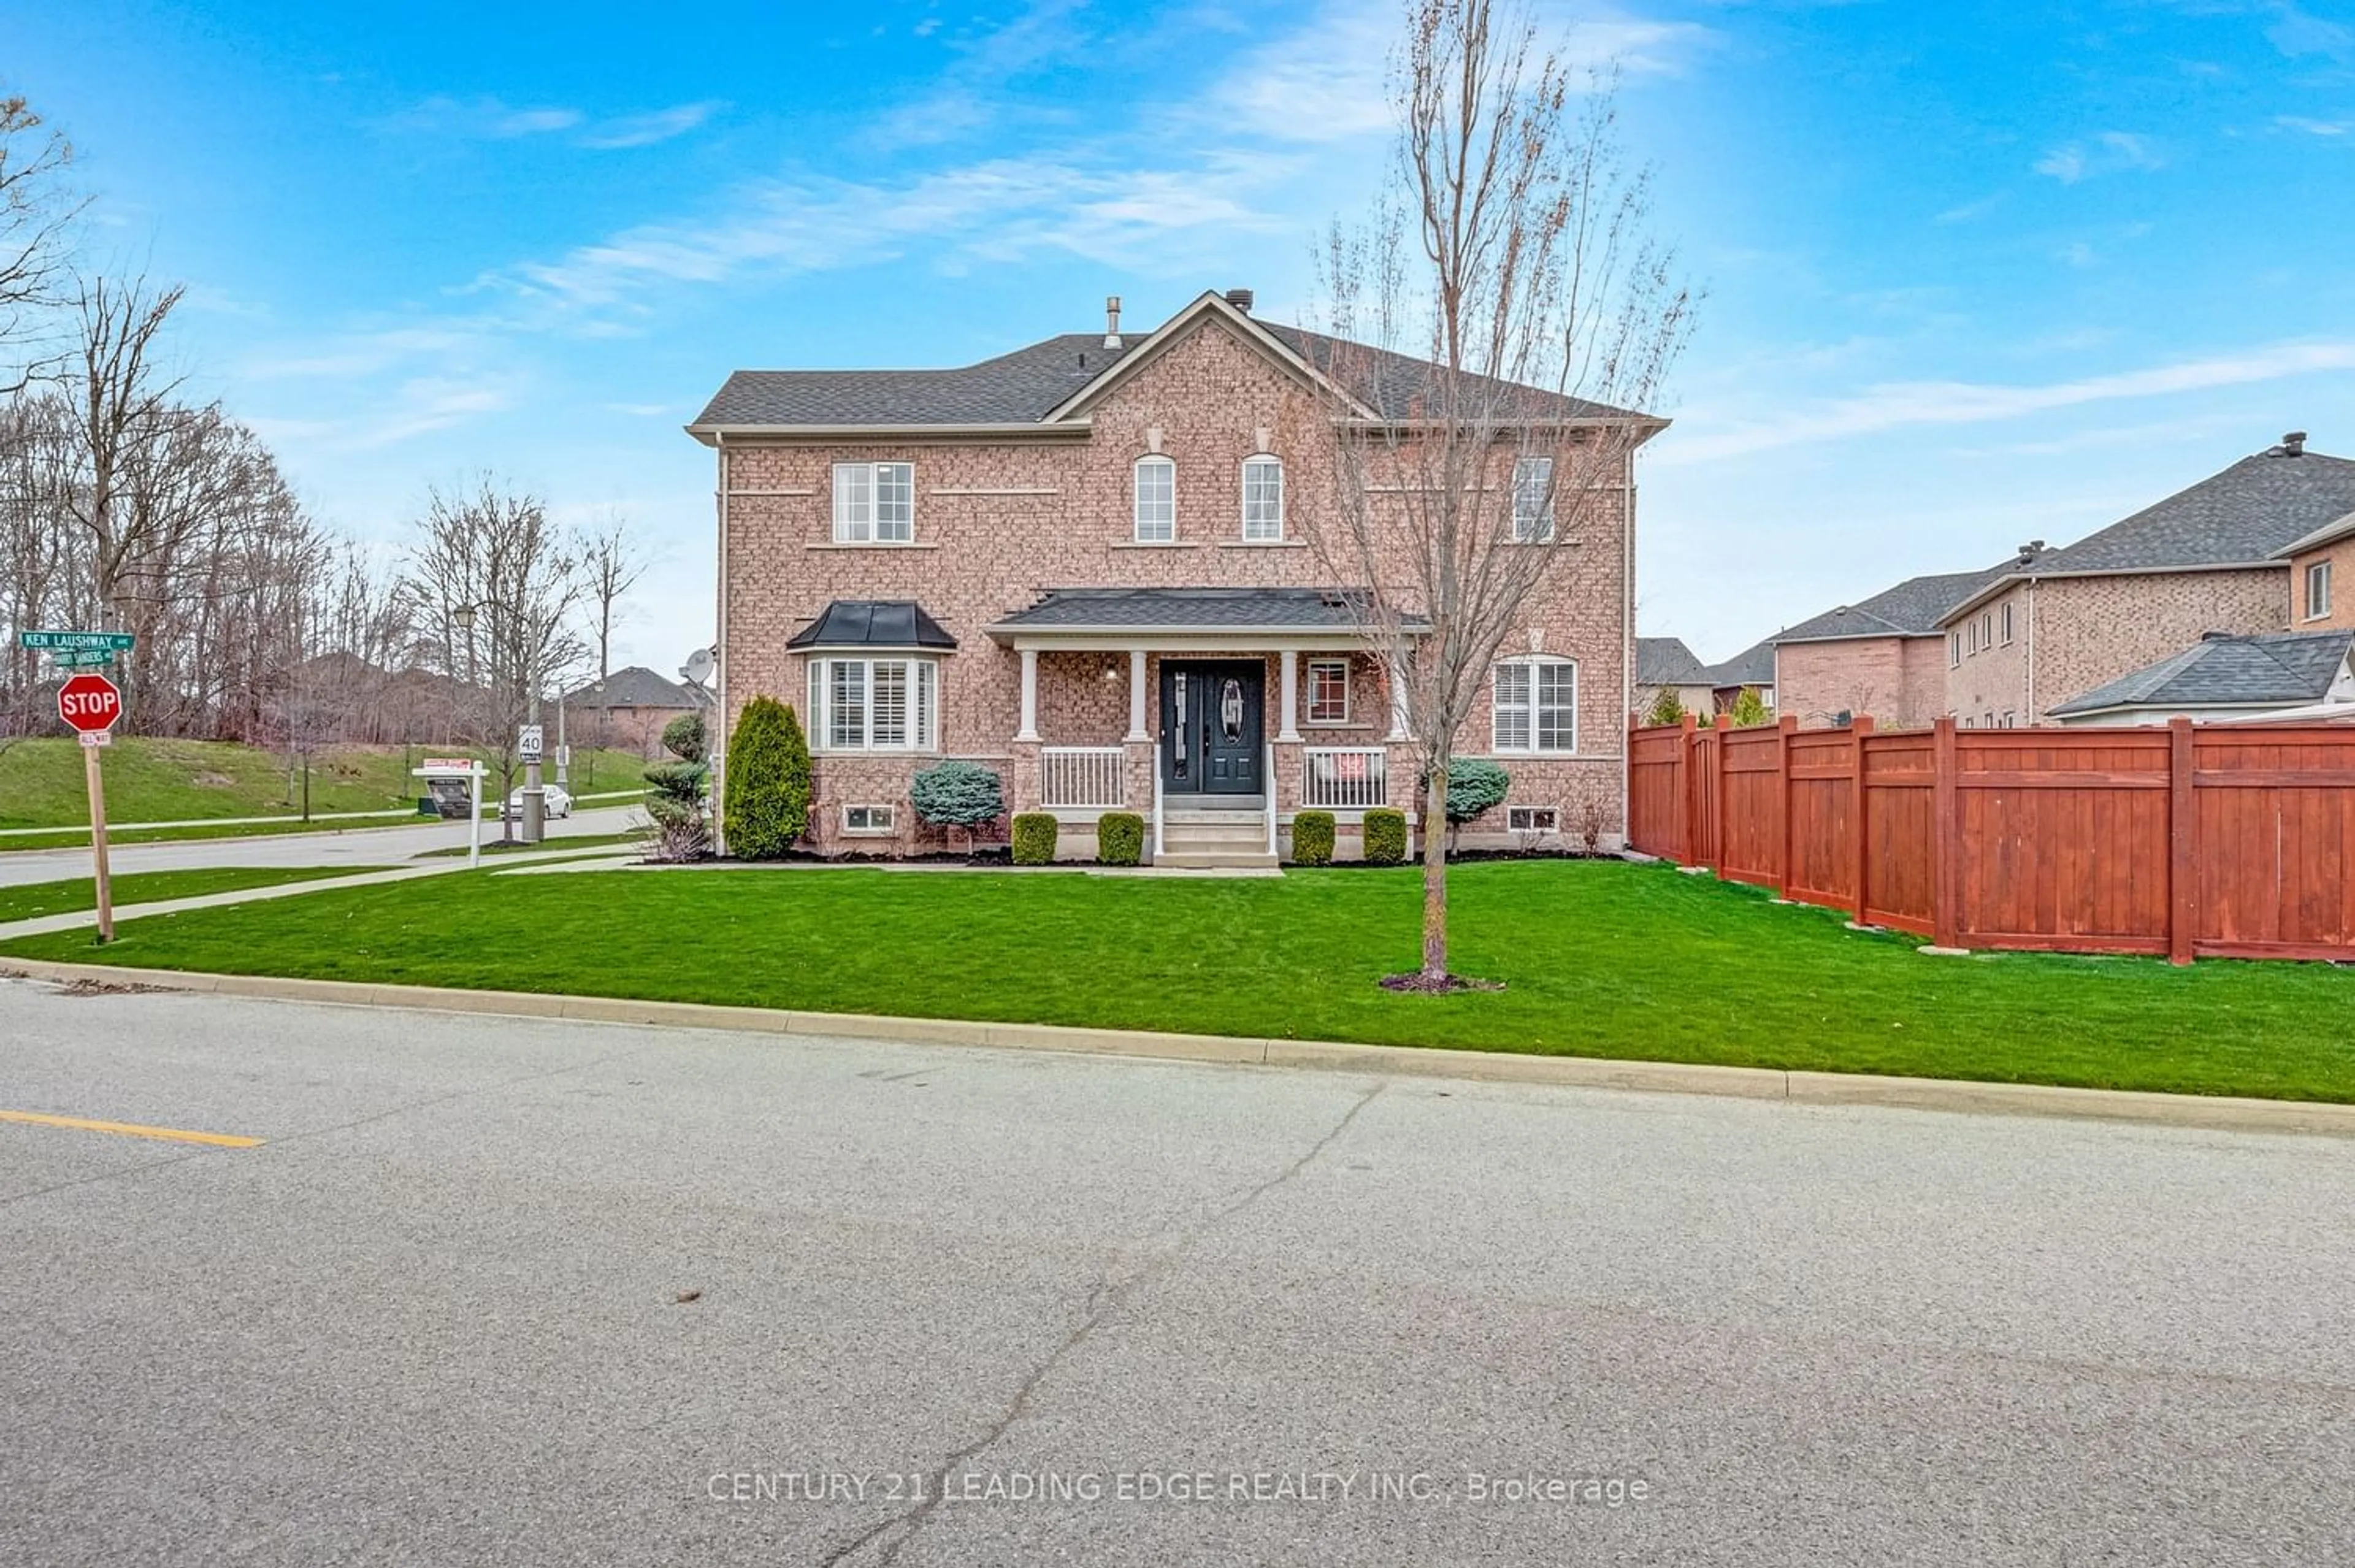 Home with brick exterior material for 146 Ken Laushway Ave, Whitchurch-Stouffville Ontario L4A 0J7